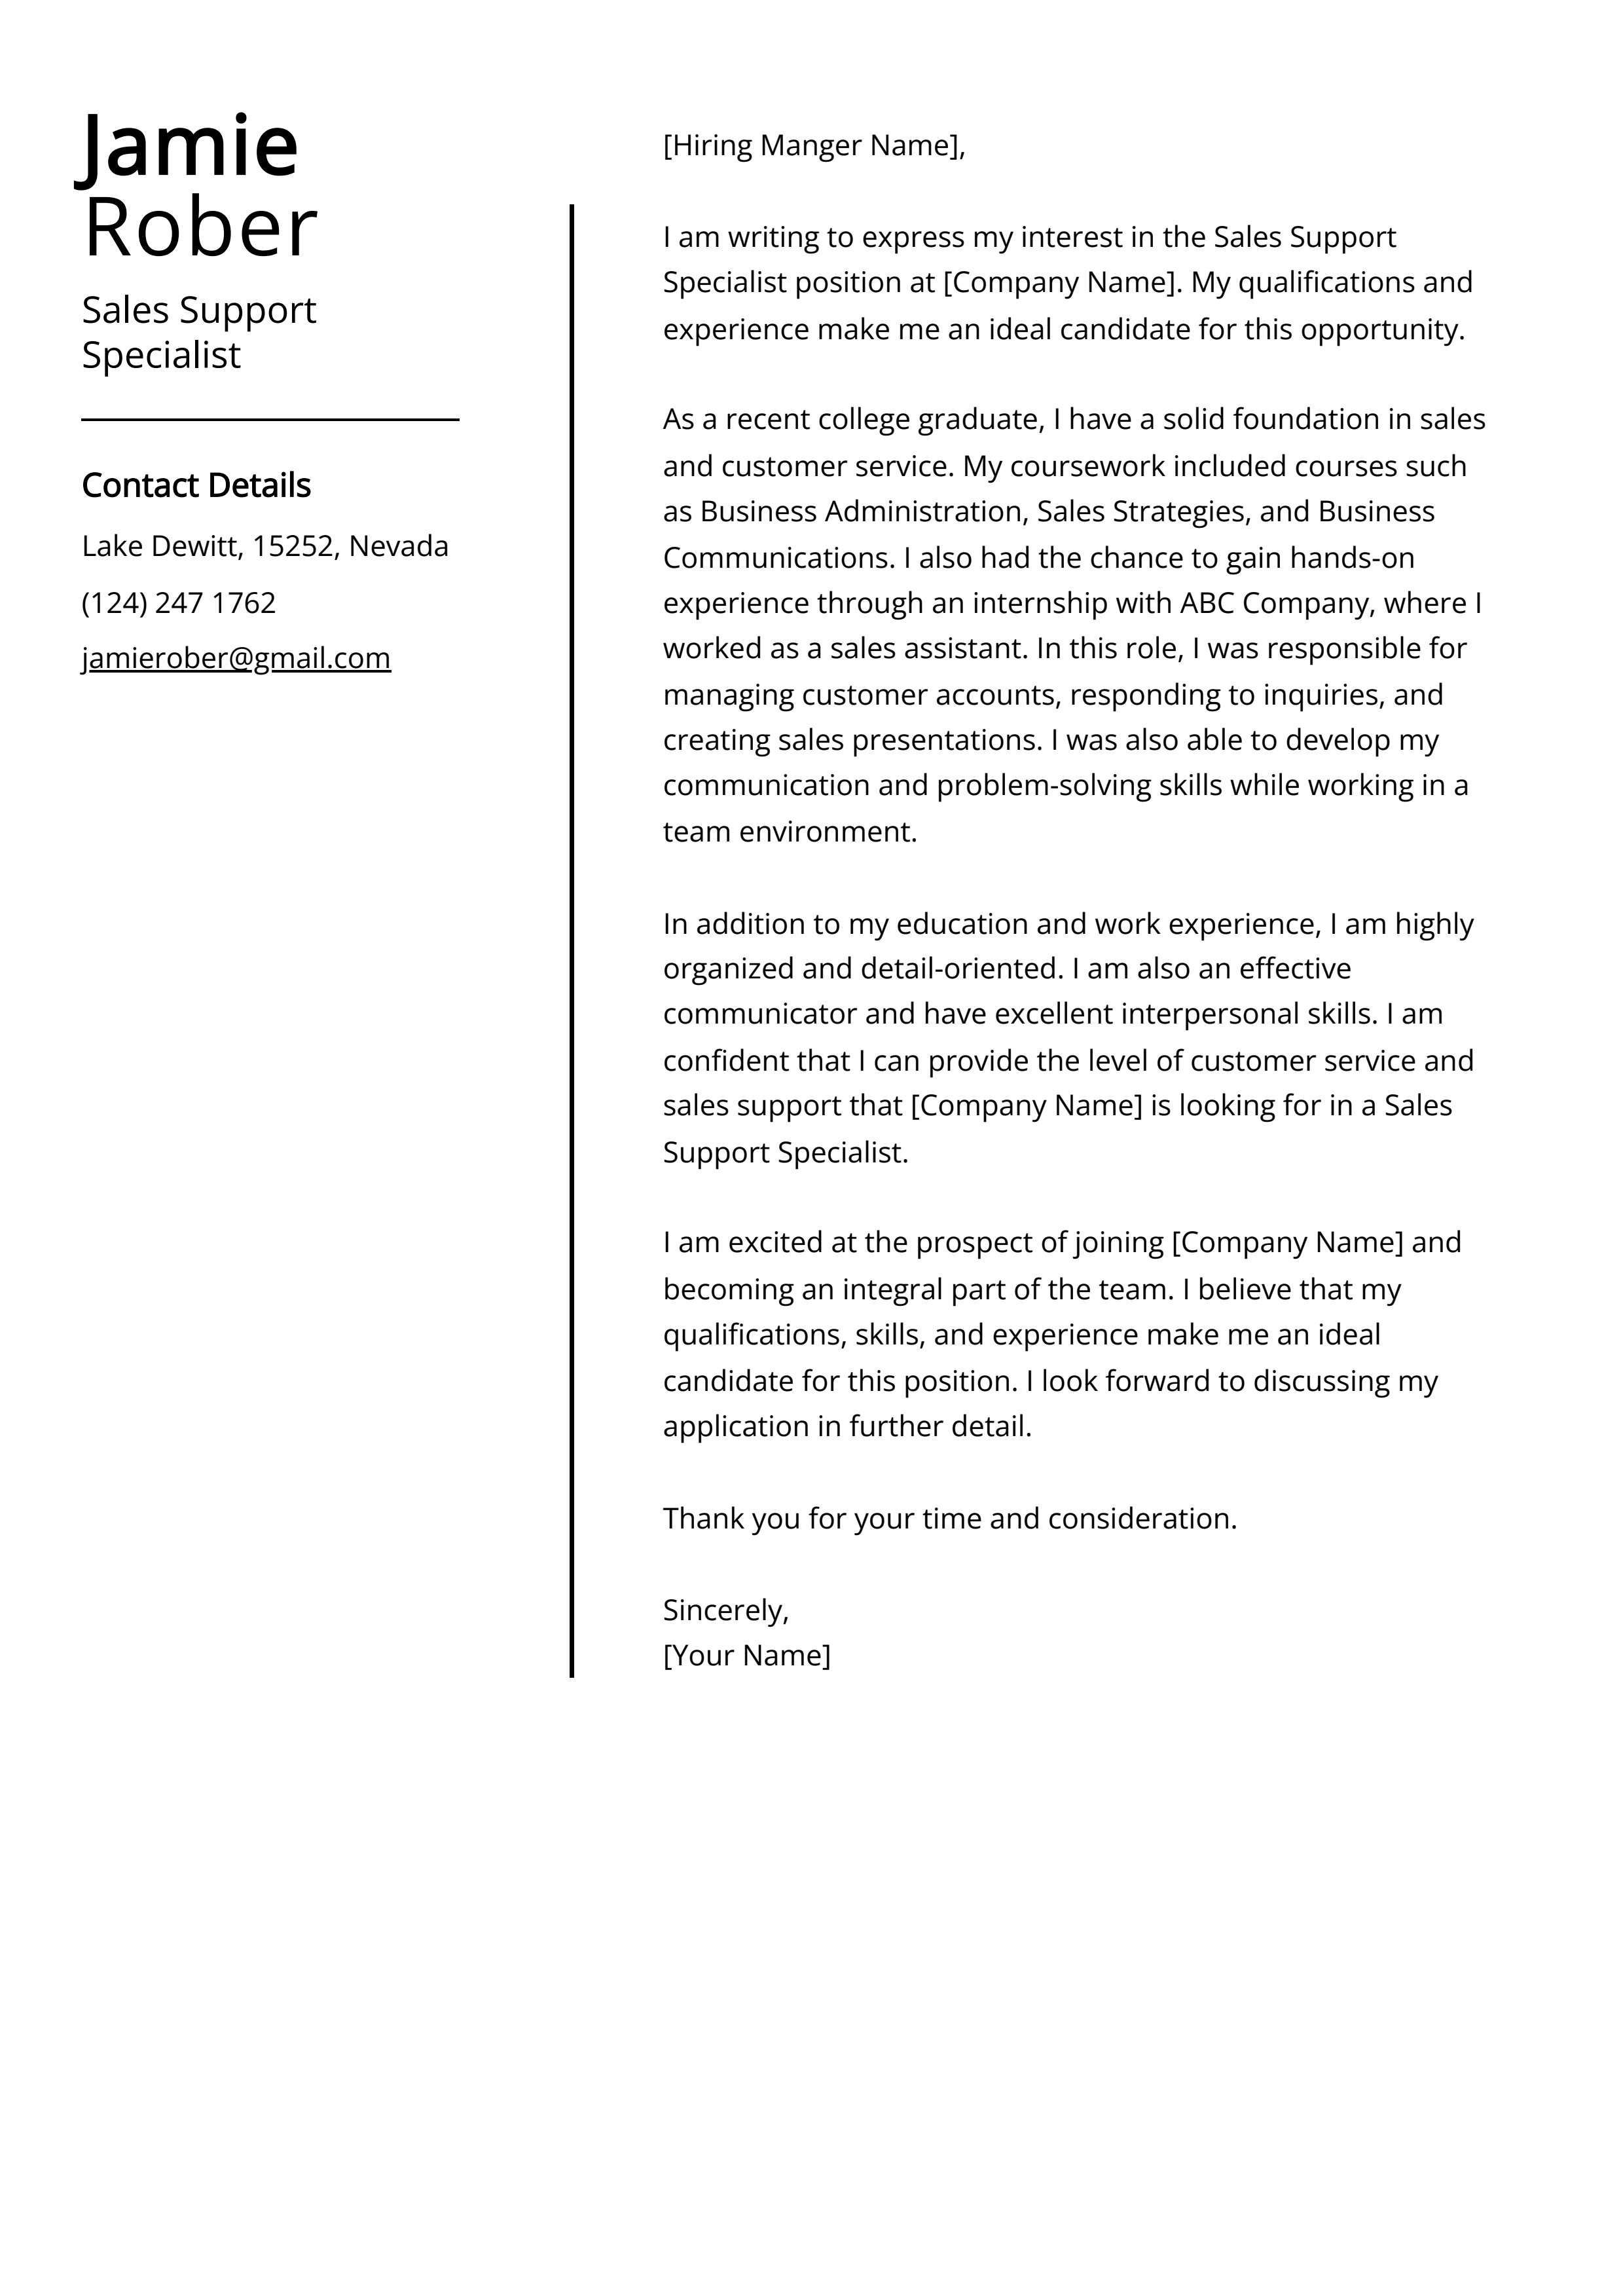 Sales Support Specialist Cover Letter Example